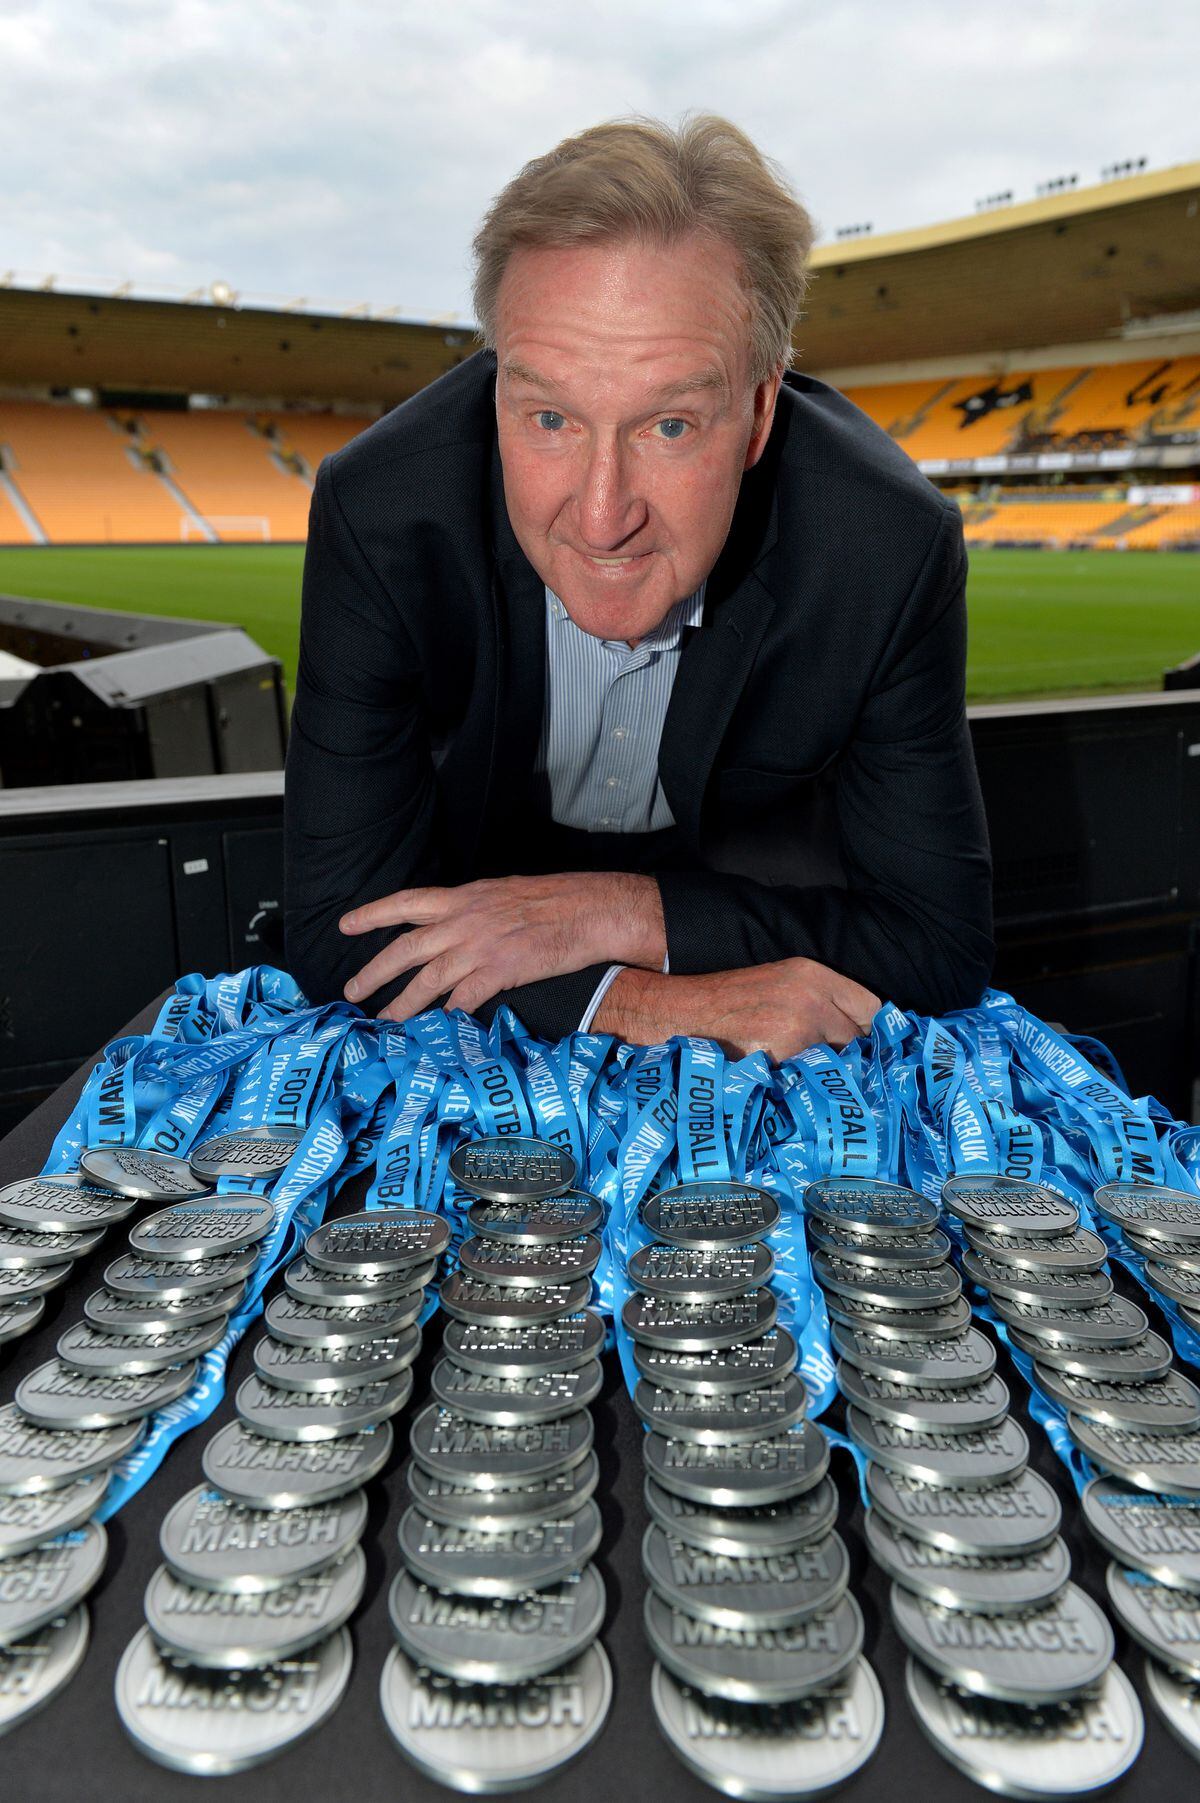 Ex-Wolves player Steve Daley presents the medals at the Prostate Cancer UK event 